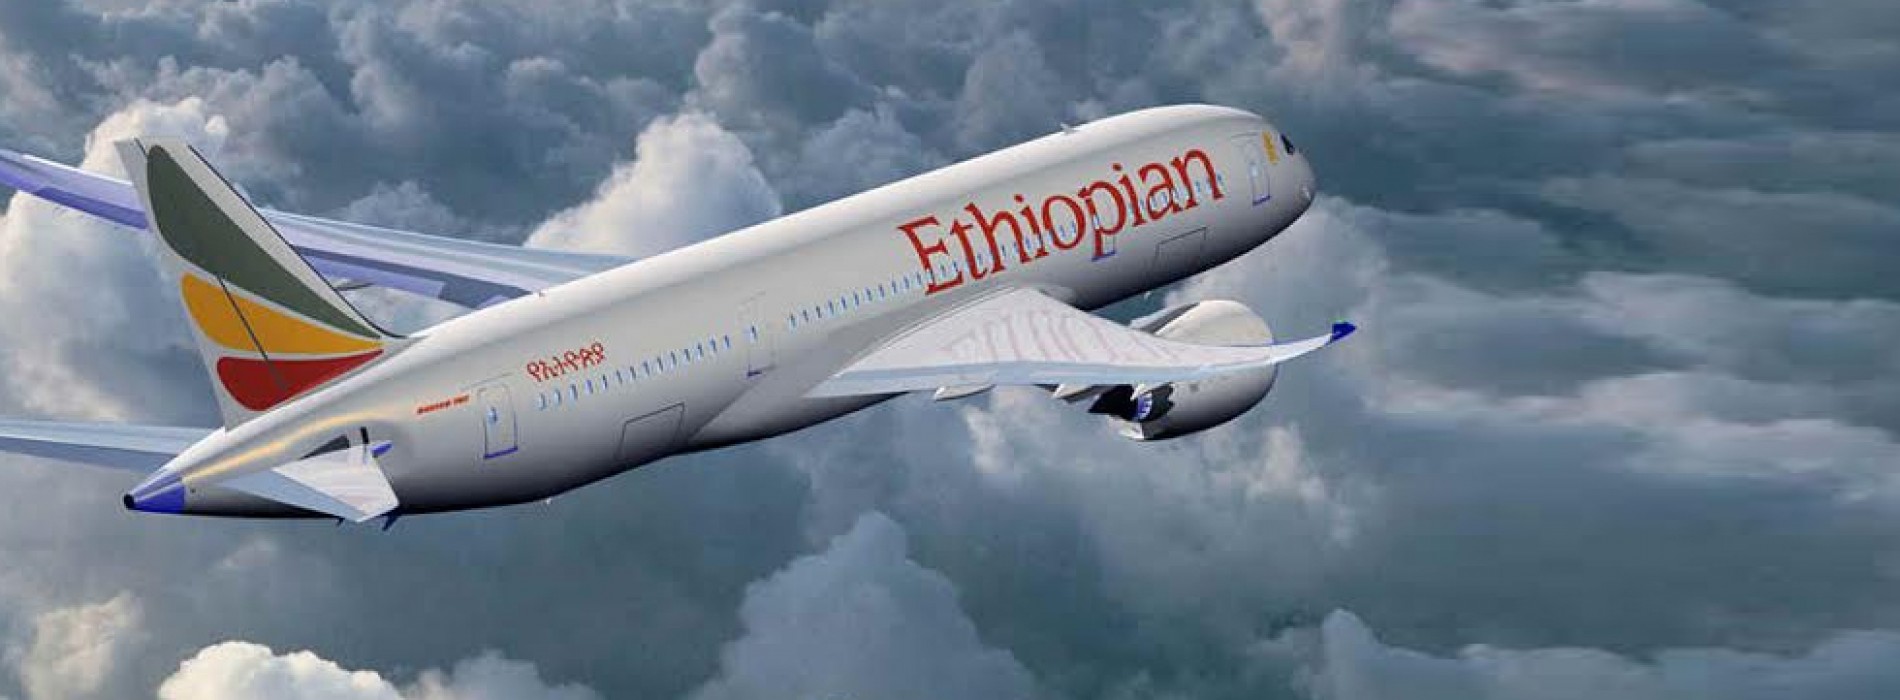 Ethiopian Airlines, South African Airways to revamp Codeshare Services